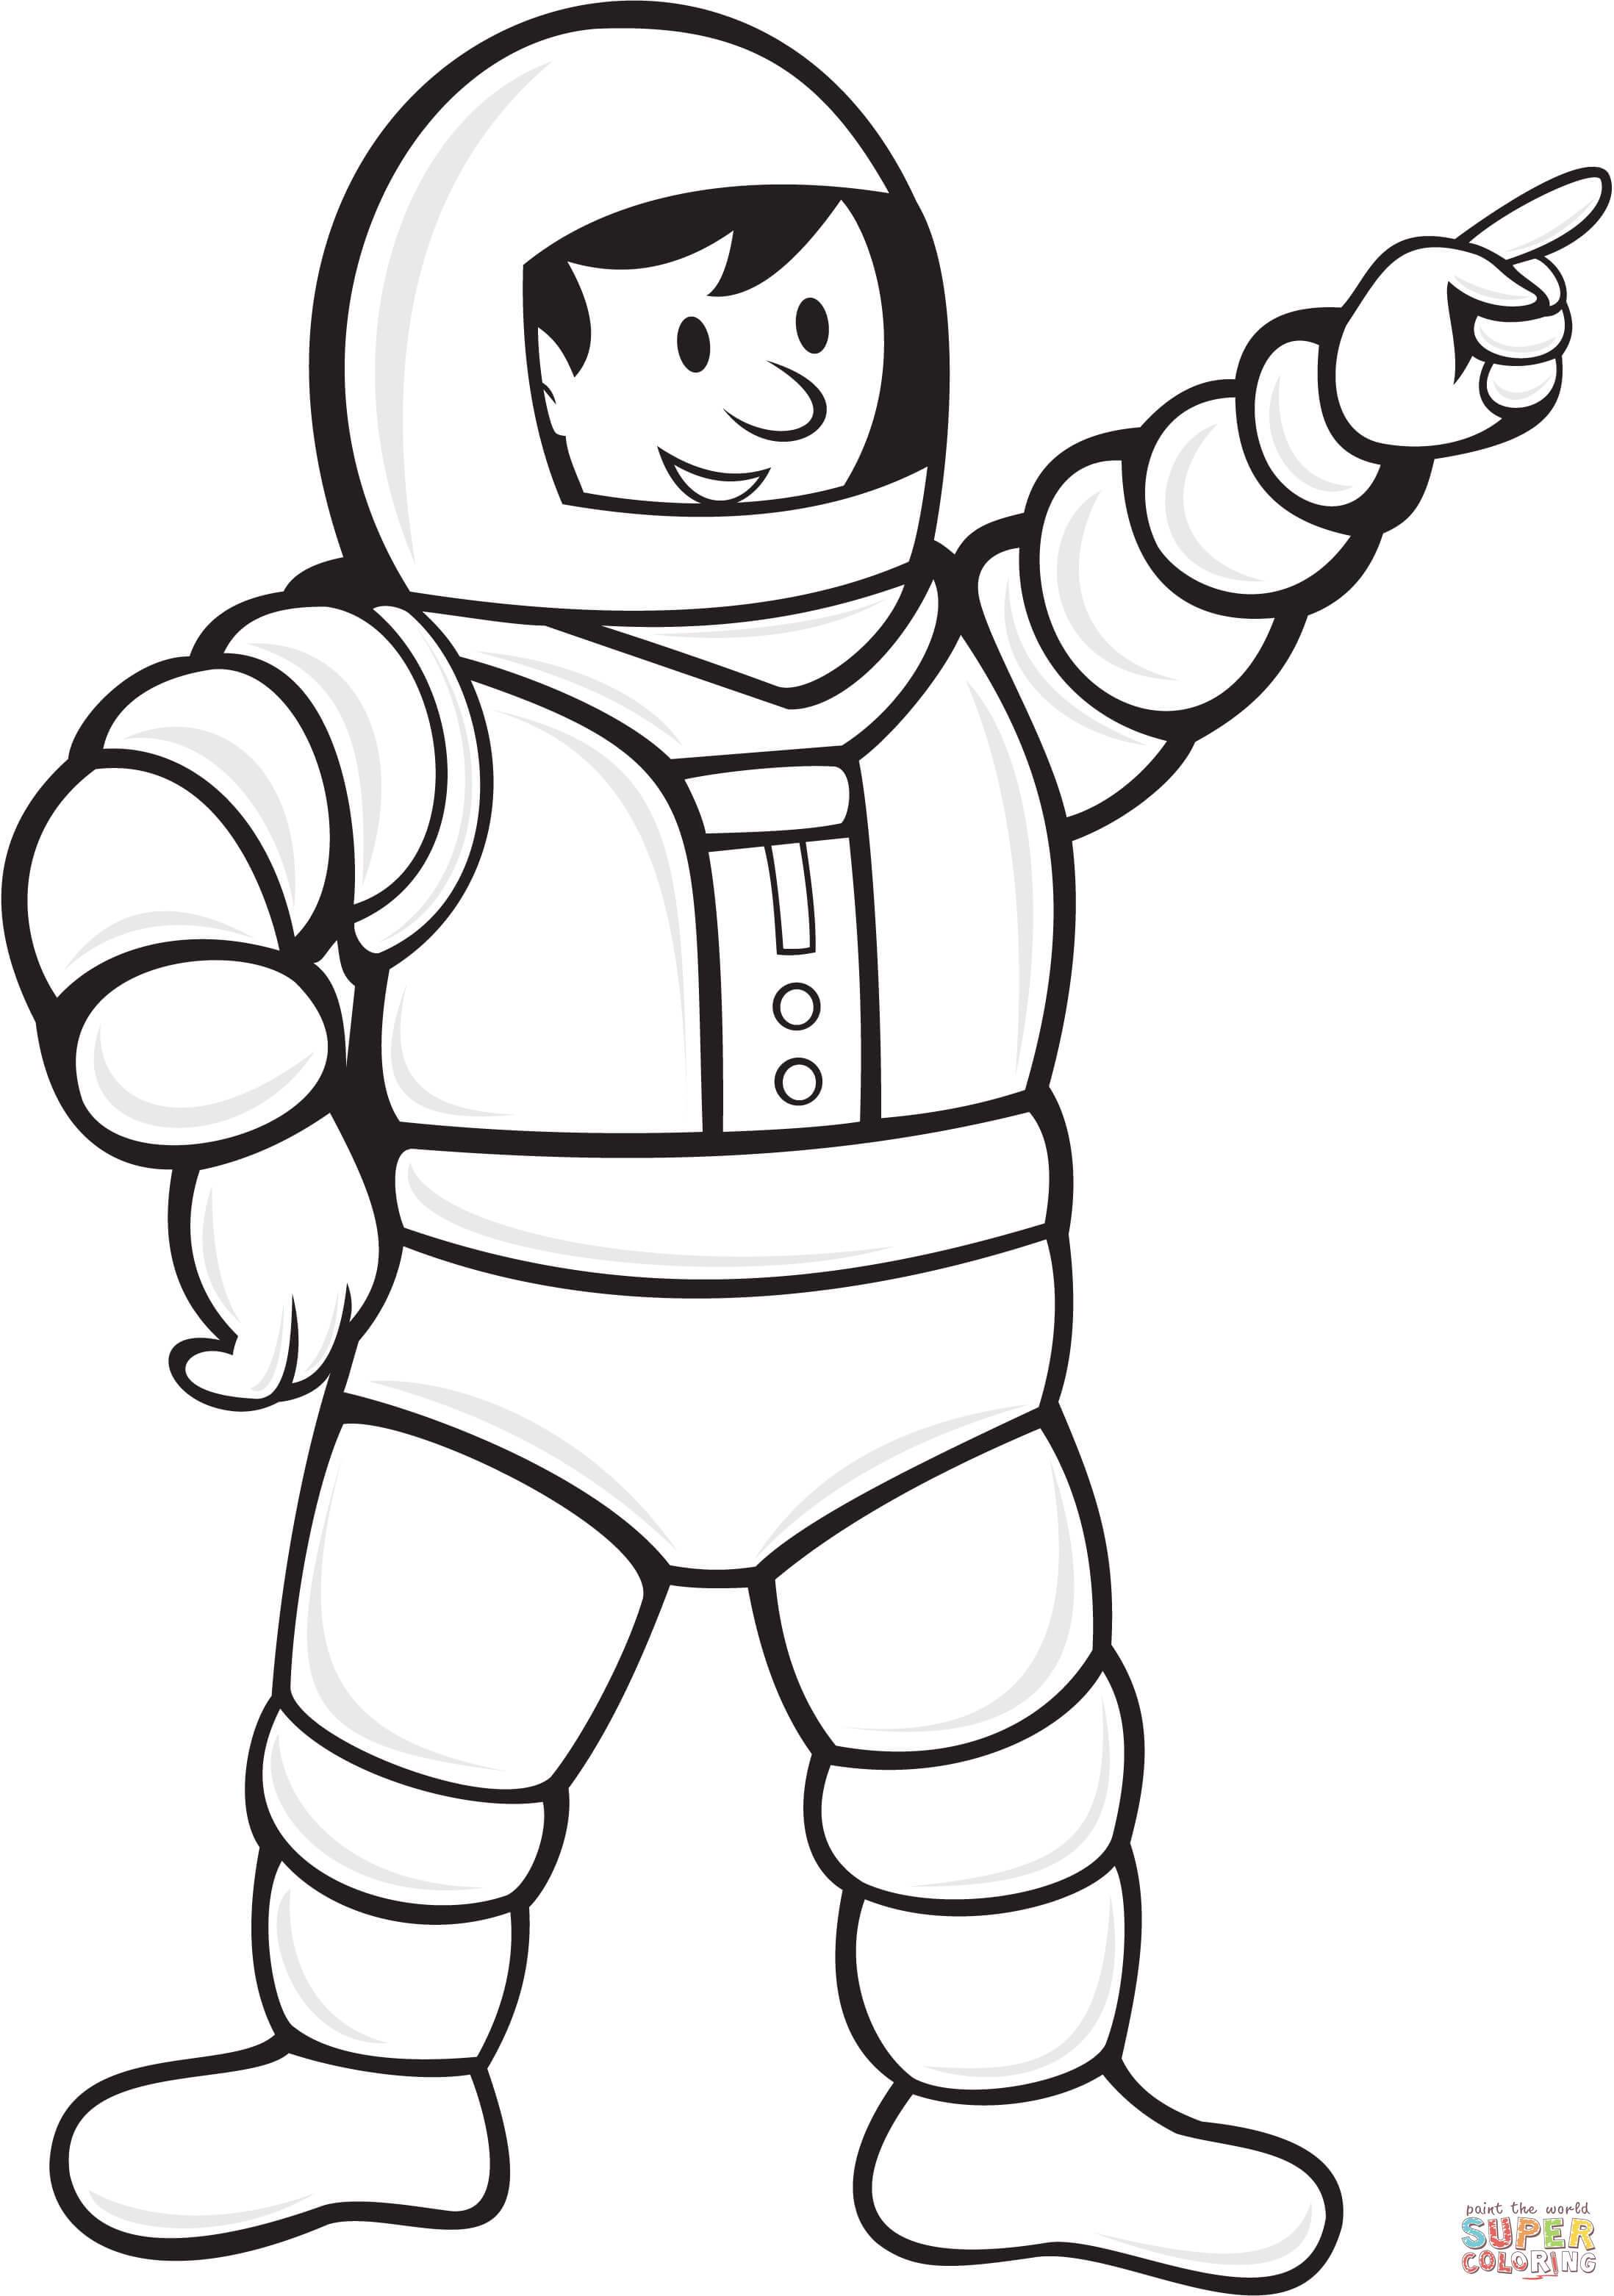 Space Suit Drawing | Free download on ClipArtMag